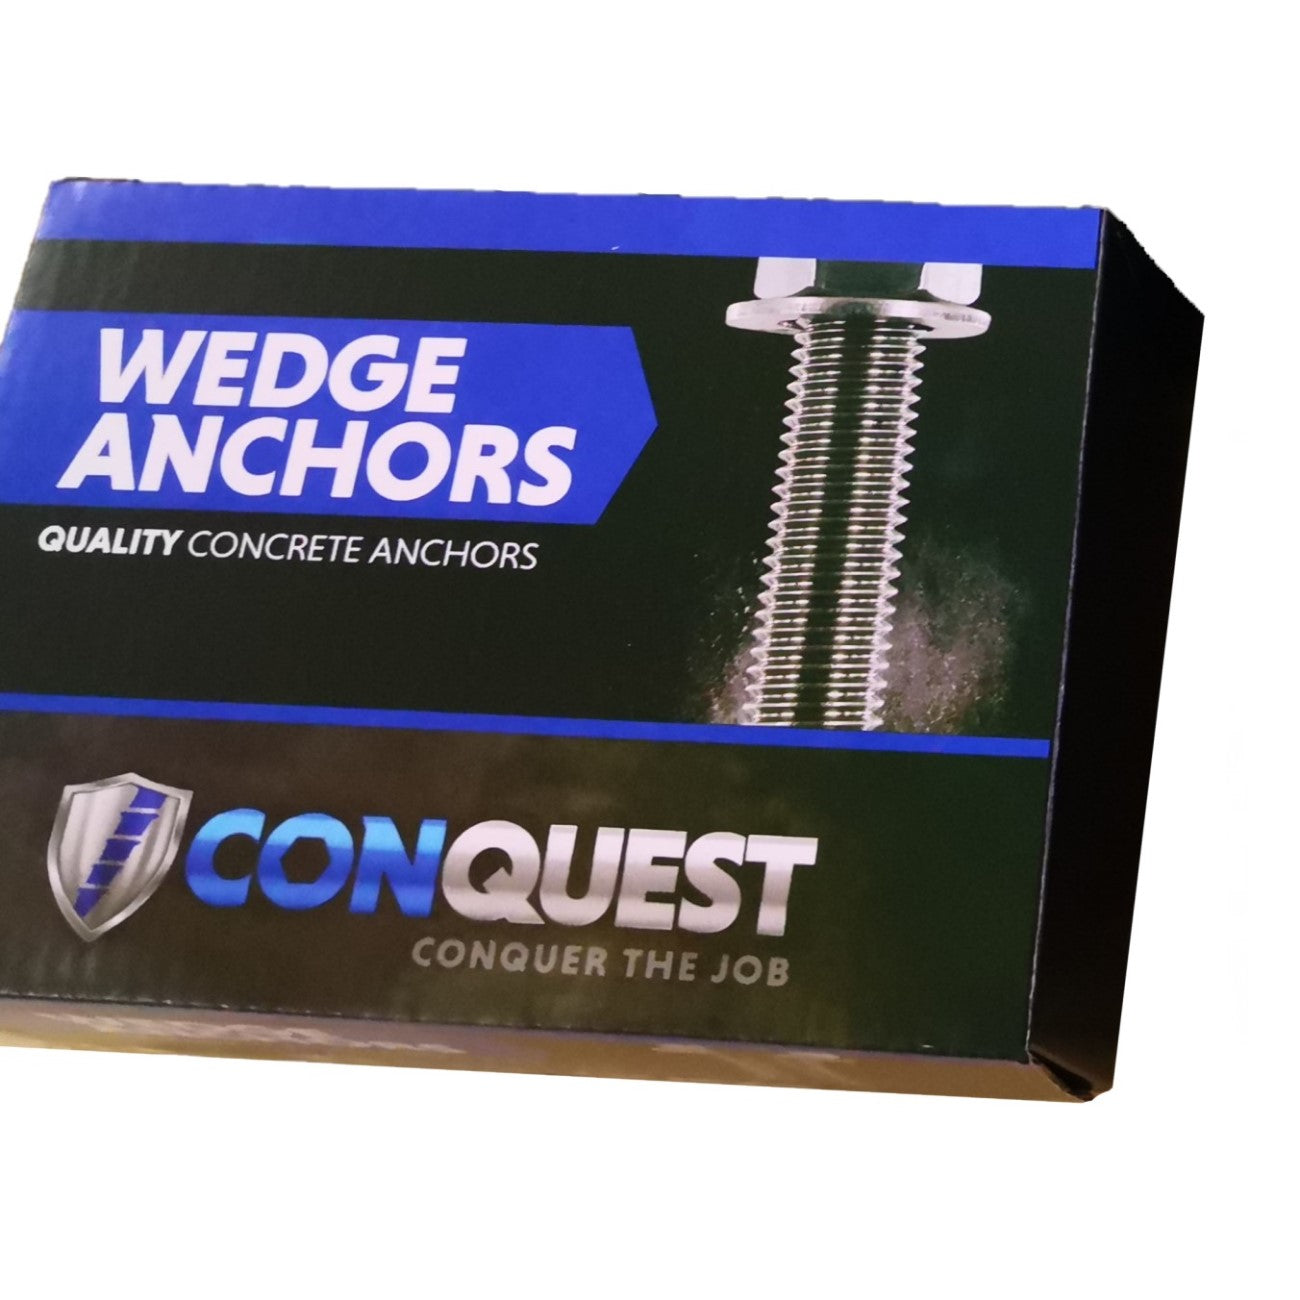 1/4" x 3-1/4" Conquest Wedge Anchors - 316 Stainless Steel, Pkg 100